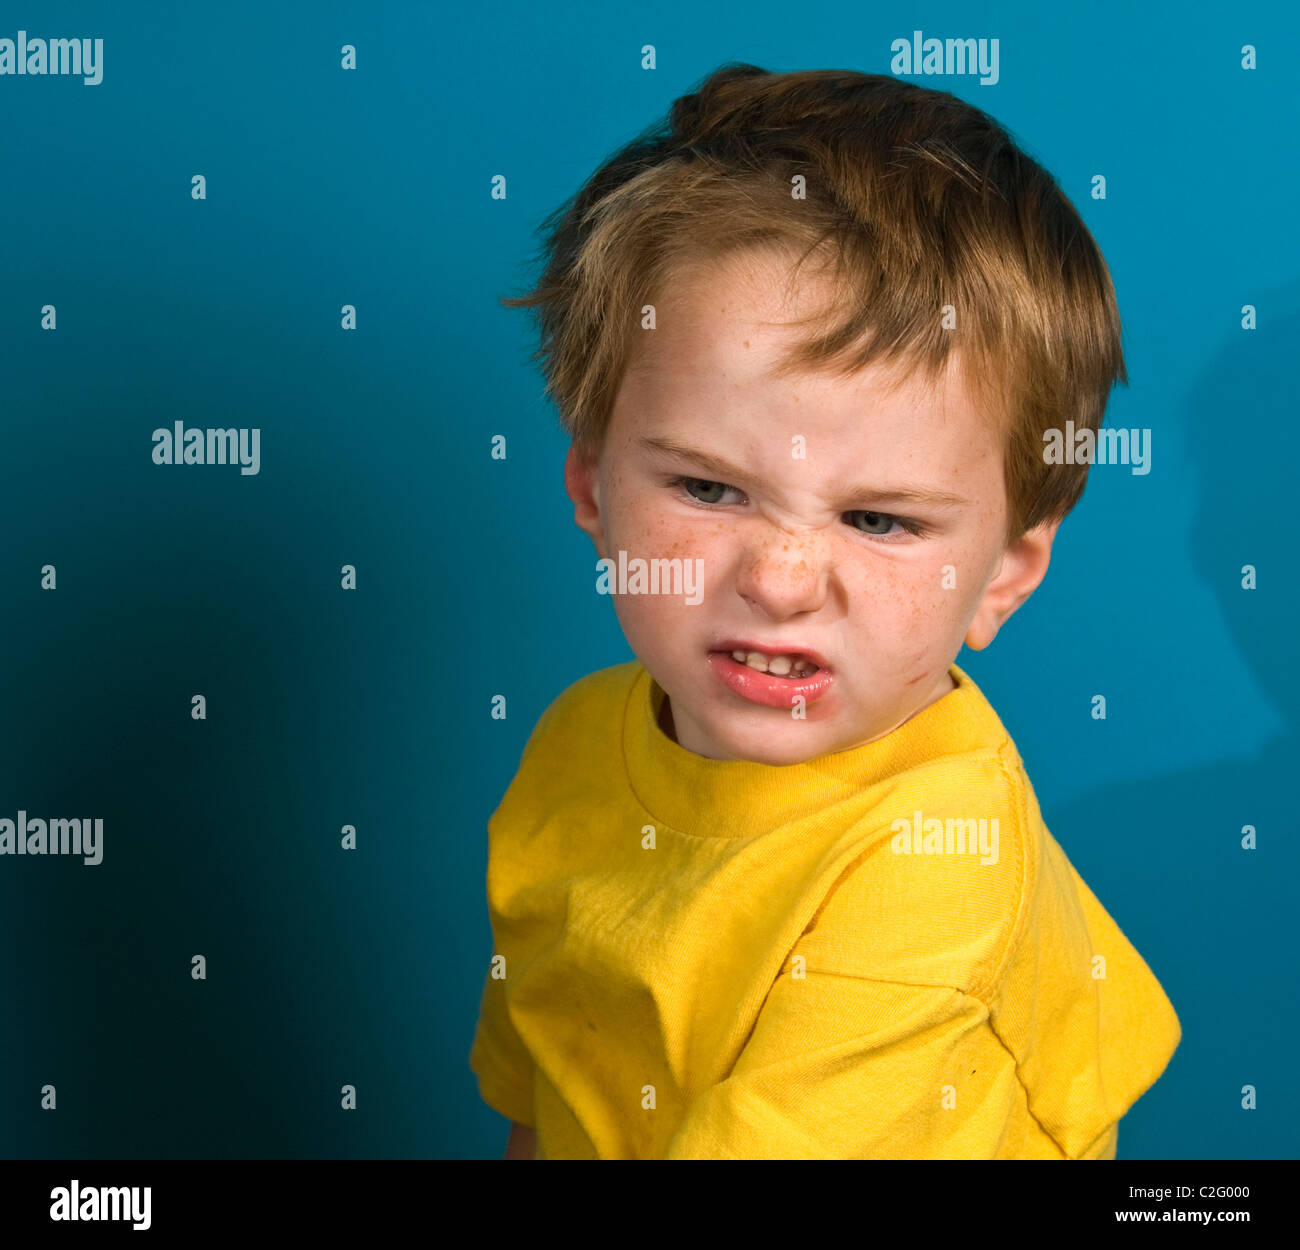 An annoyed 2 year old boy, Stock Photo